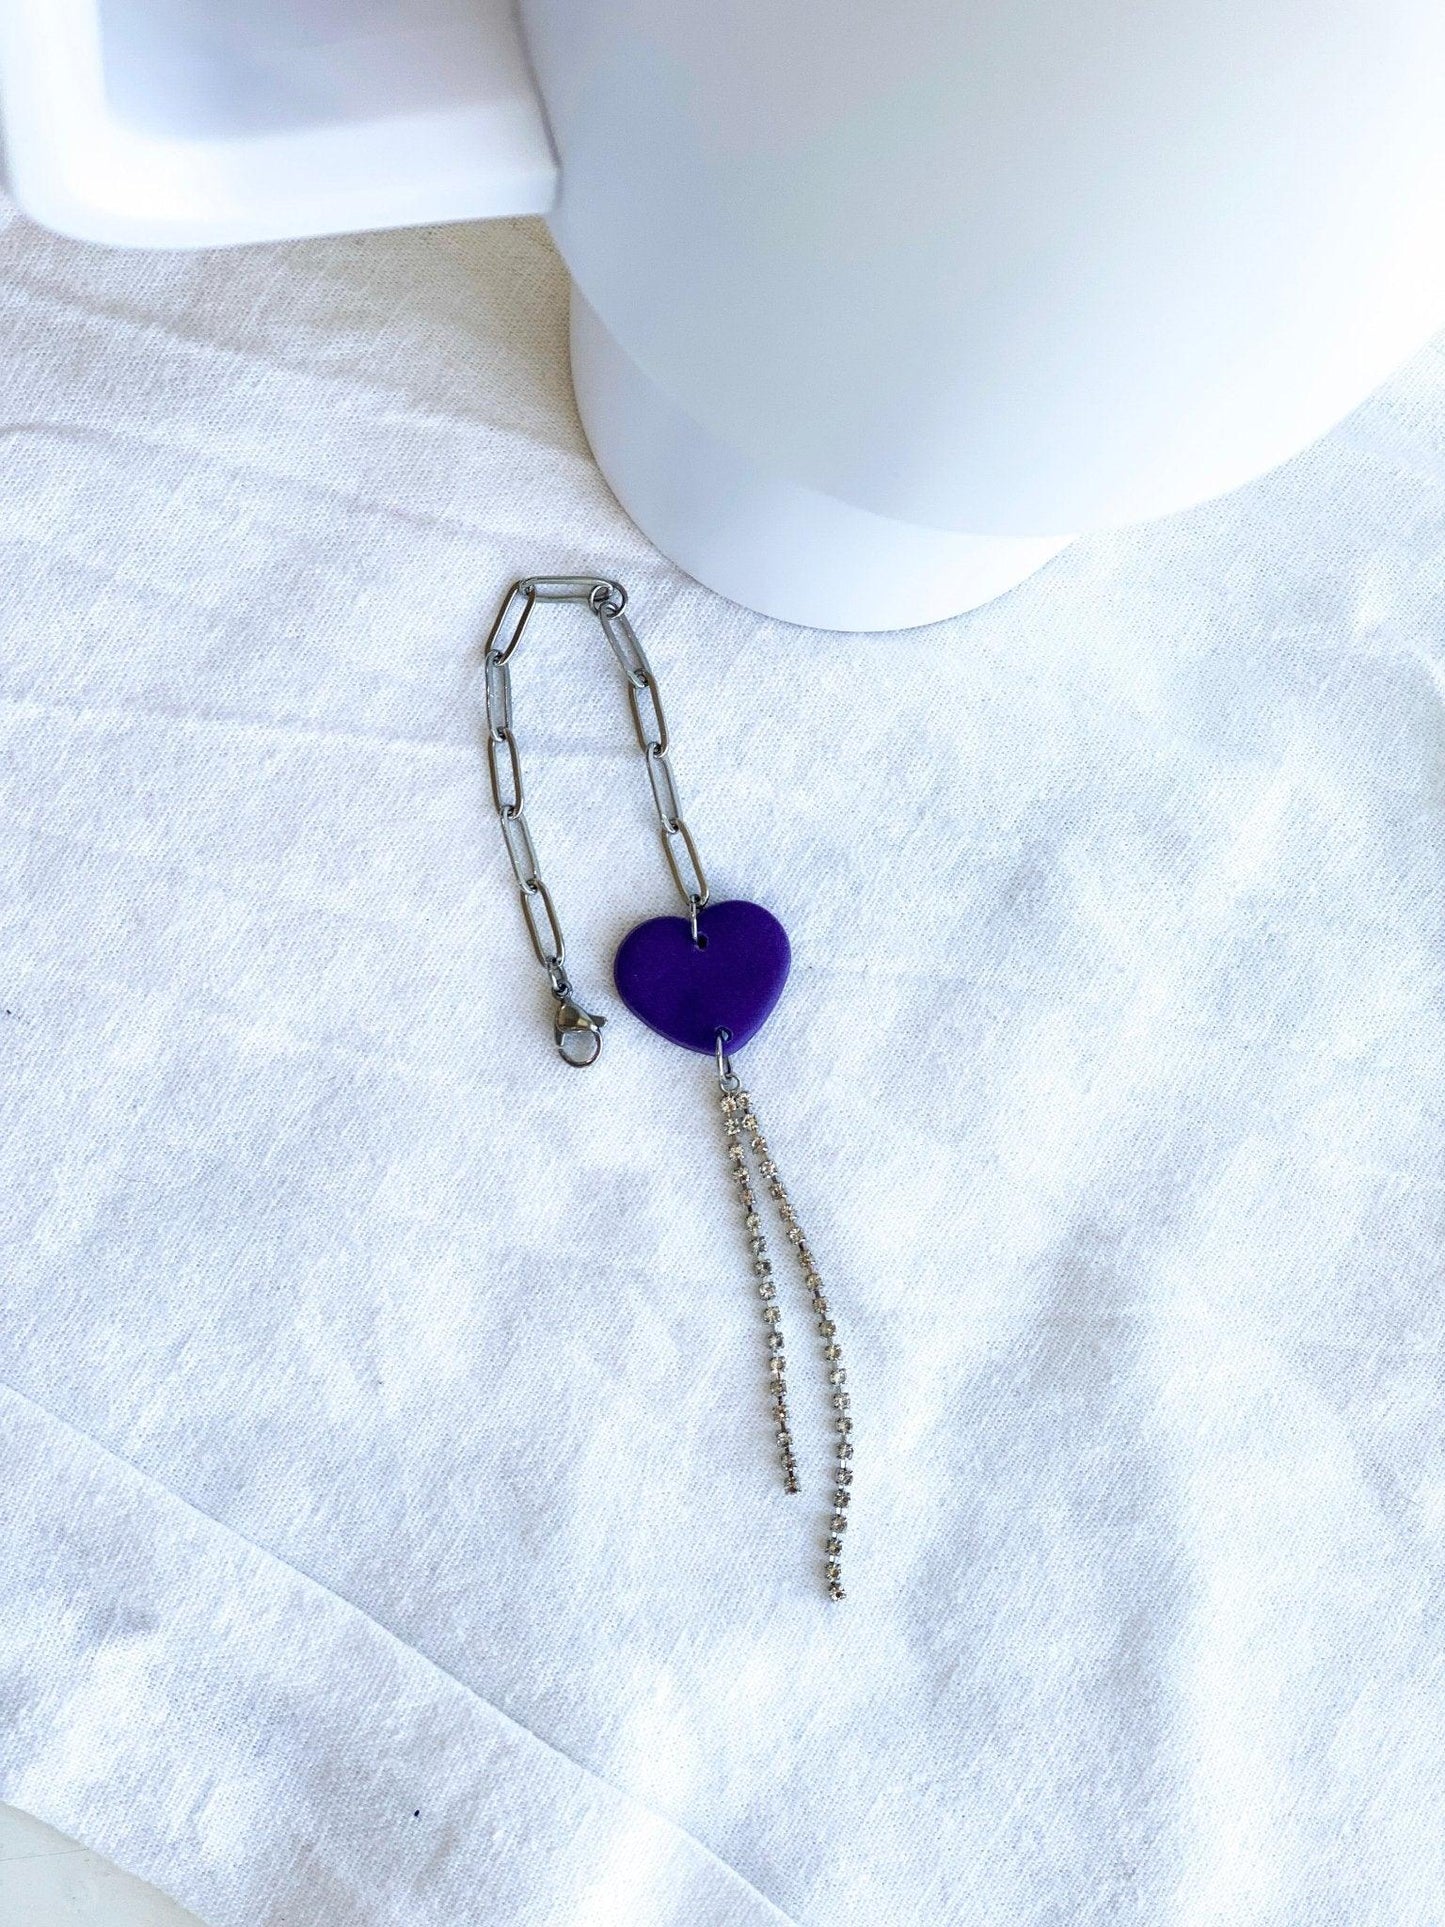 Purple Heart with Silver Rhinestone Strands Stanley Charm Attached To Silver Stainless Steel Chain Laying Flat on White Cloth